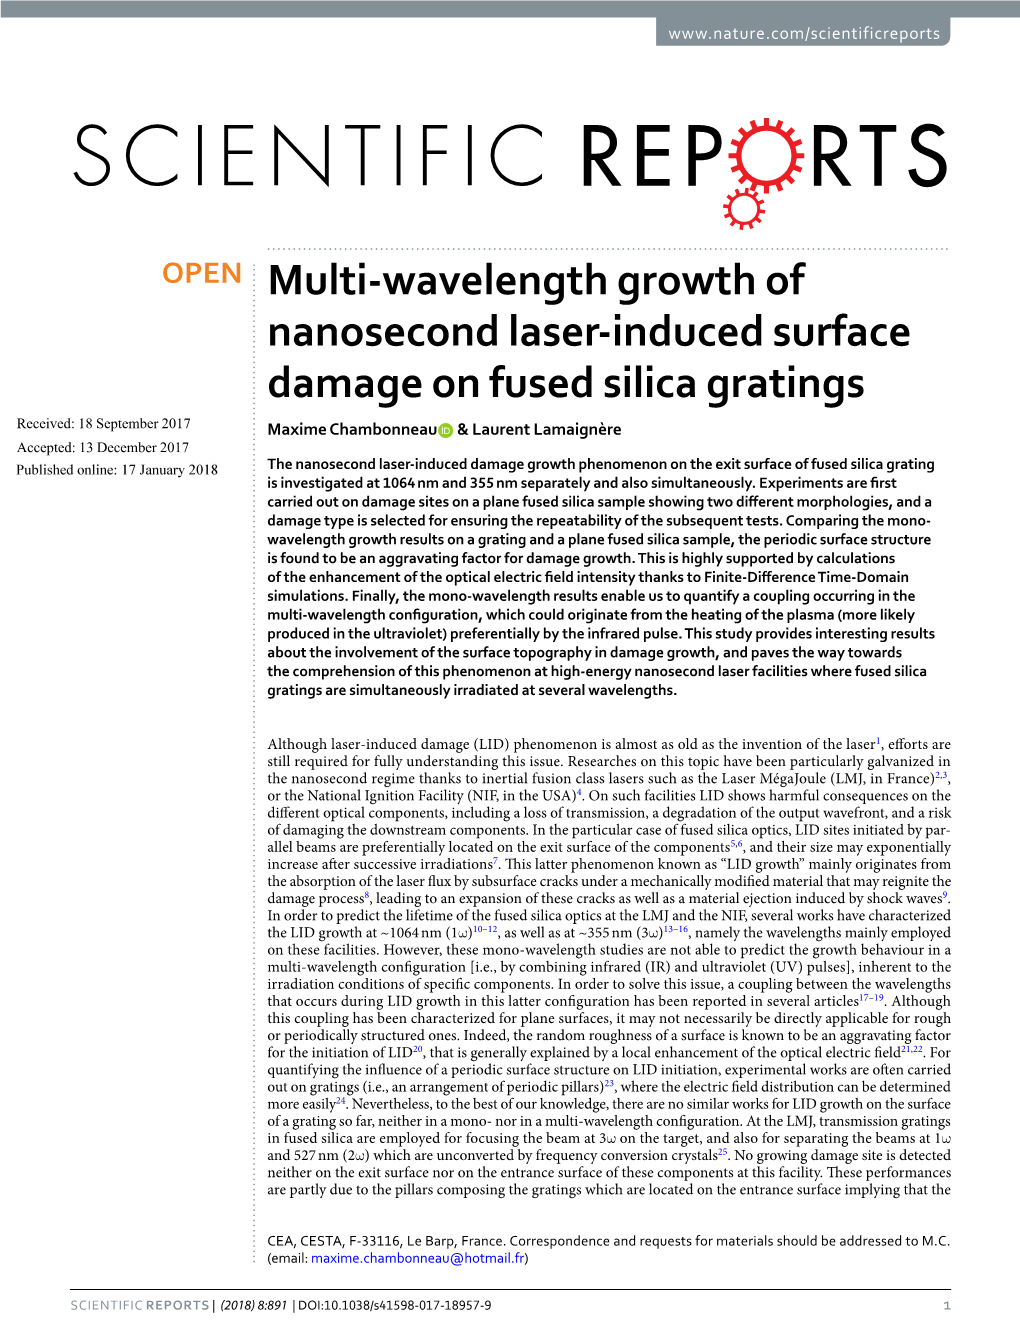 Multi-Wavelength Growth of Nanosecond Laser-Induced Surface